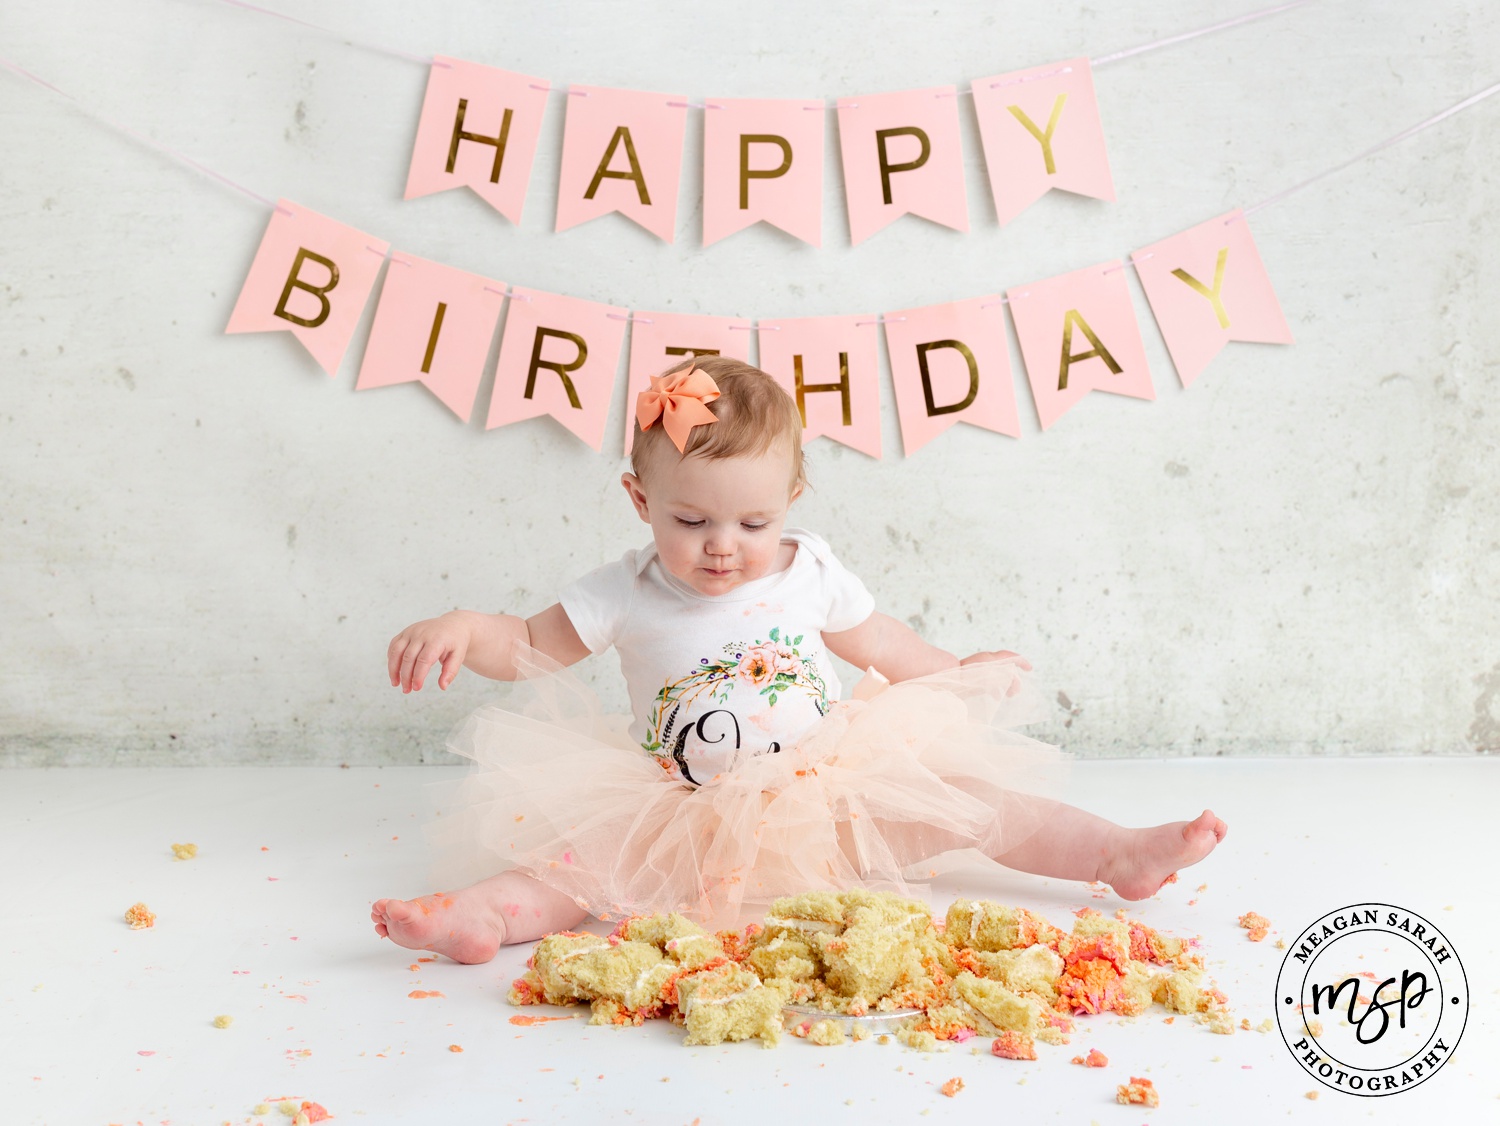 Baby fun,Birthday Idea,Cake,Cake smash,Cake smash ideas,First Birthday,Happy Birthday,Little Ones,Leeds Photographer,Cute babies,Baby Pictures,Baby Photography Leeds,Baby Photographer Leeds,1 year old photography leeds,Meagan Sarah Photography,Professional Photographer in Leeds,West Yorkshire Photographer,Baby Girl,Pink Cake,Peach cake smash,Tutu,Affordable photographer leeds,